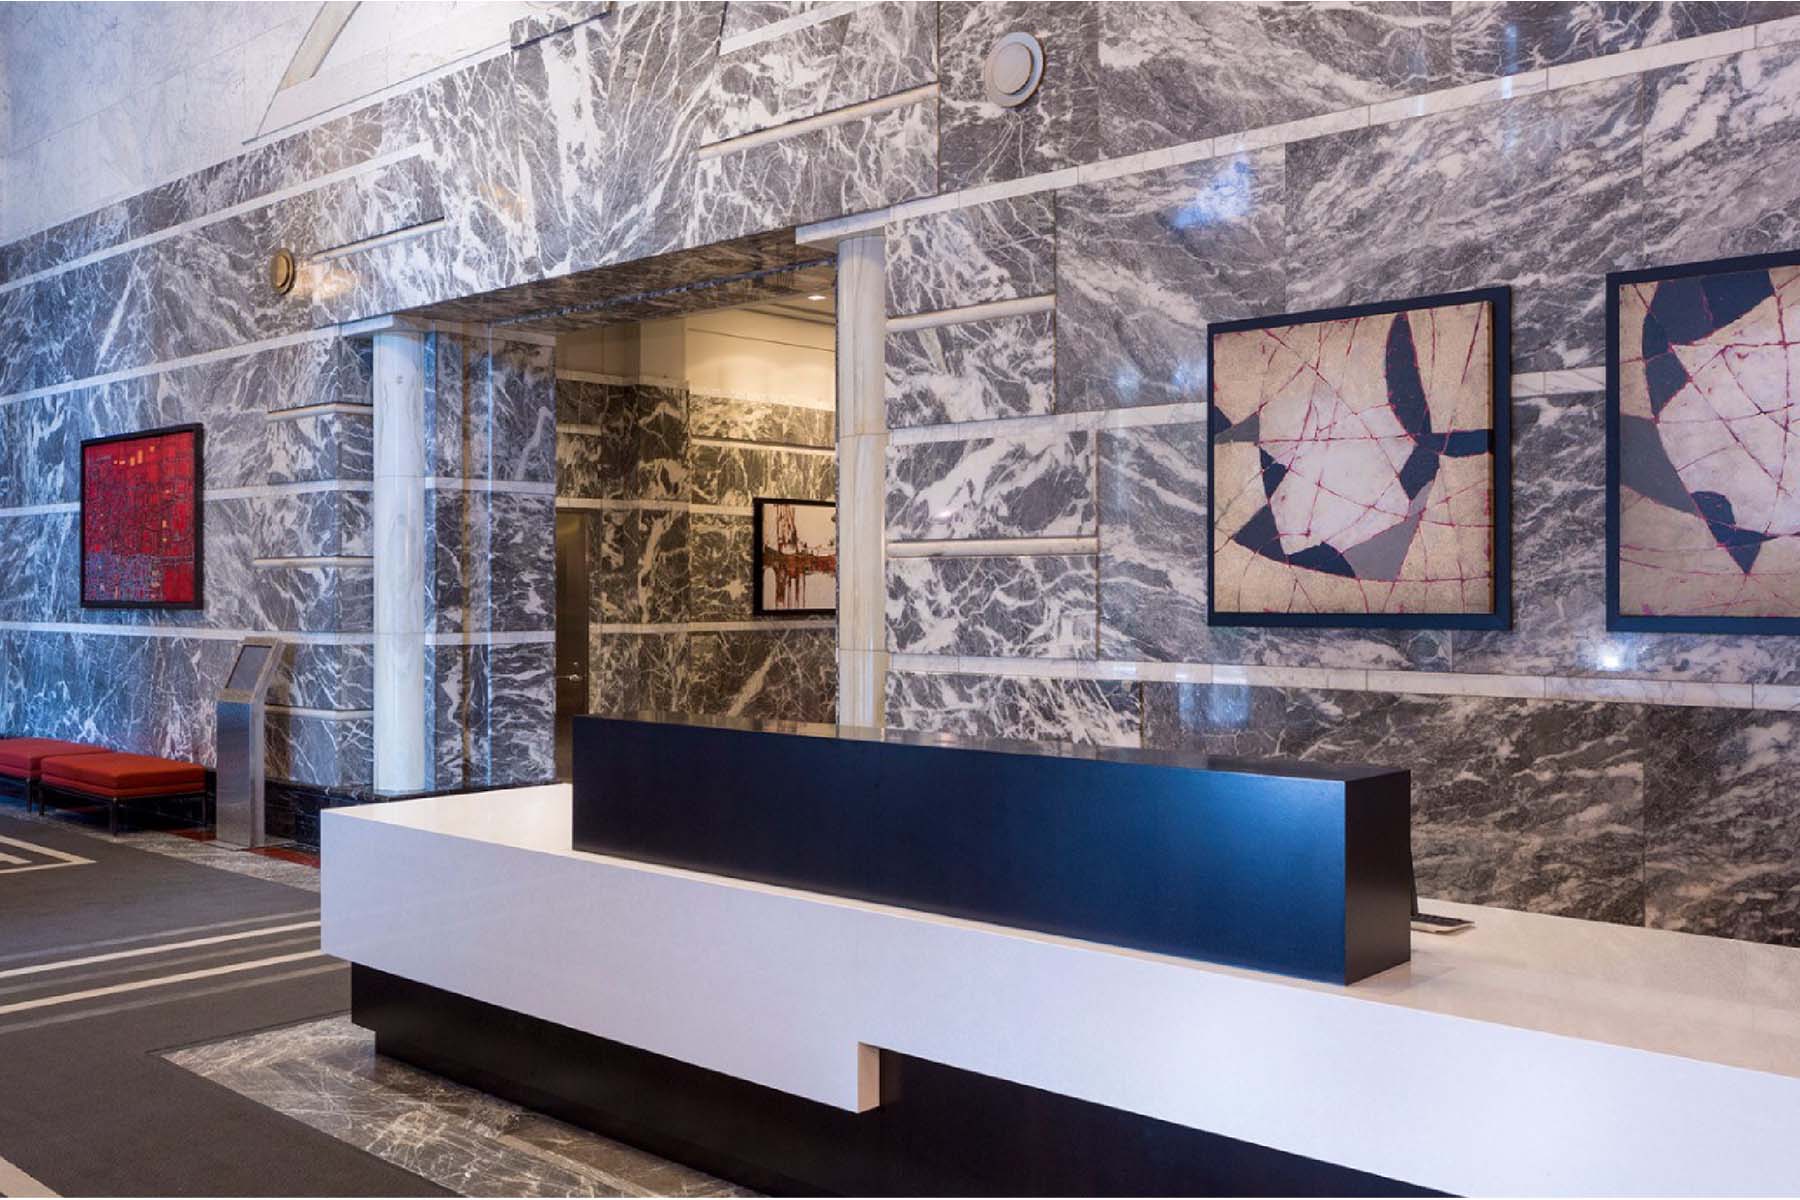 Front desk and lobby area with polished stone walls